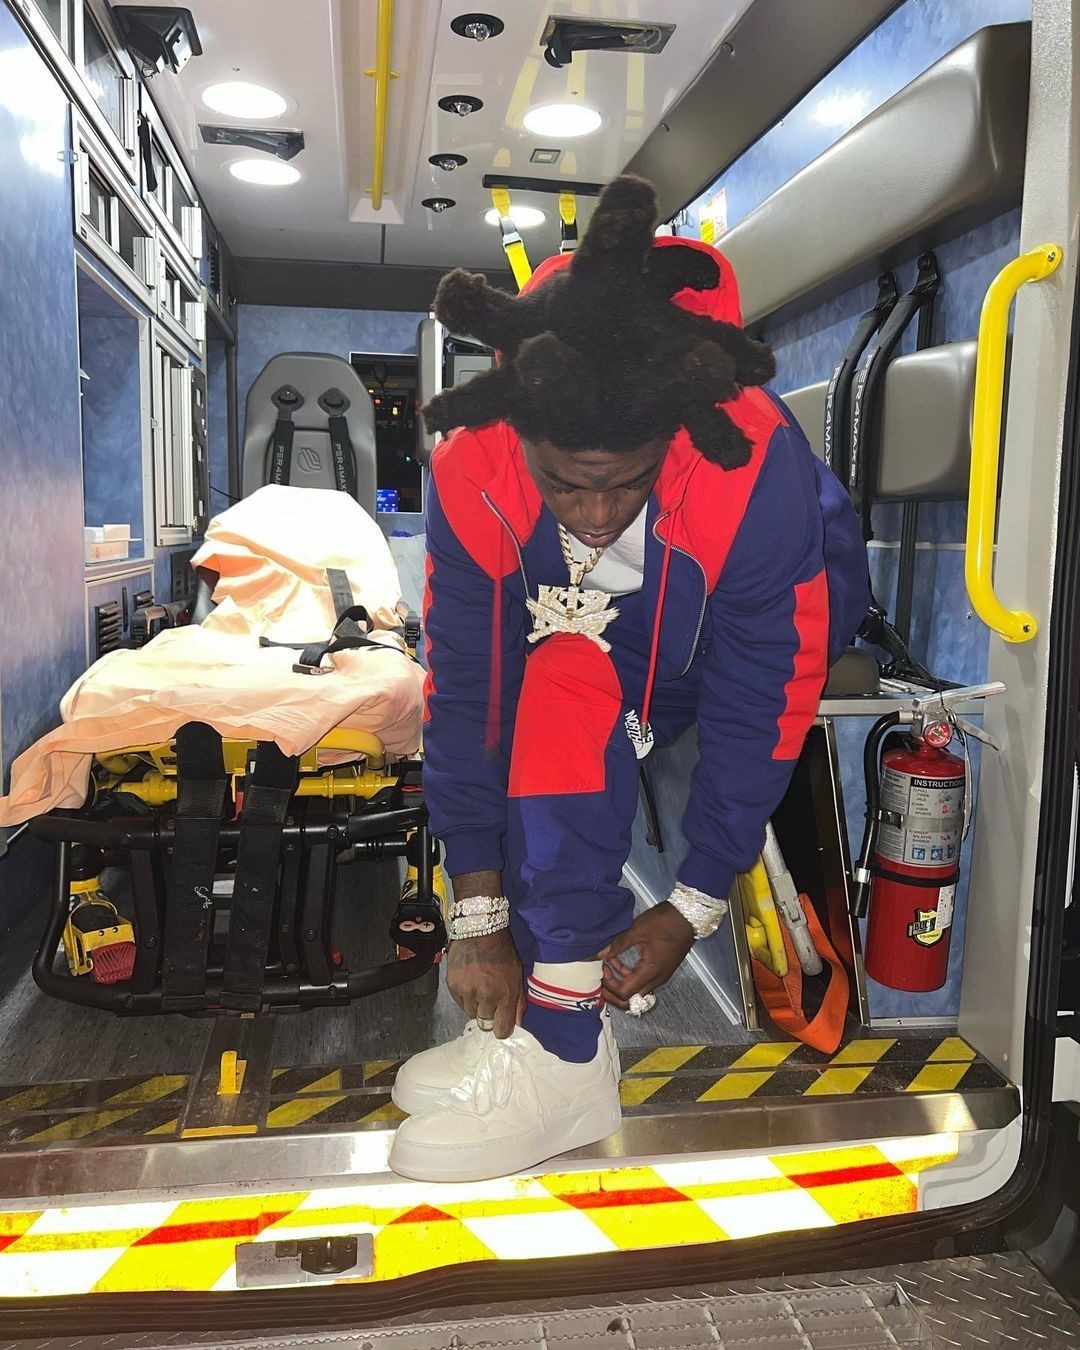 Don't Call 911! Kodak Black Ran Out of Cars to Match With, Now